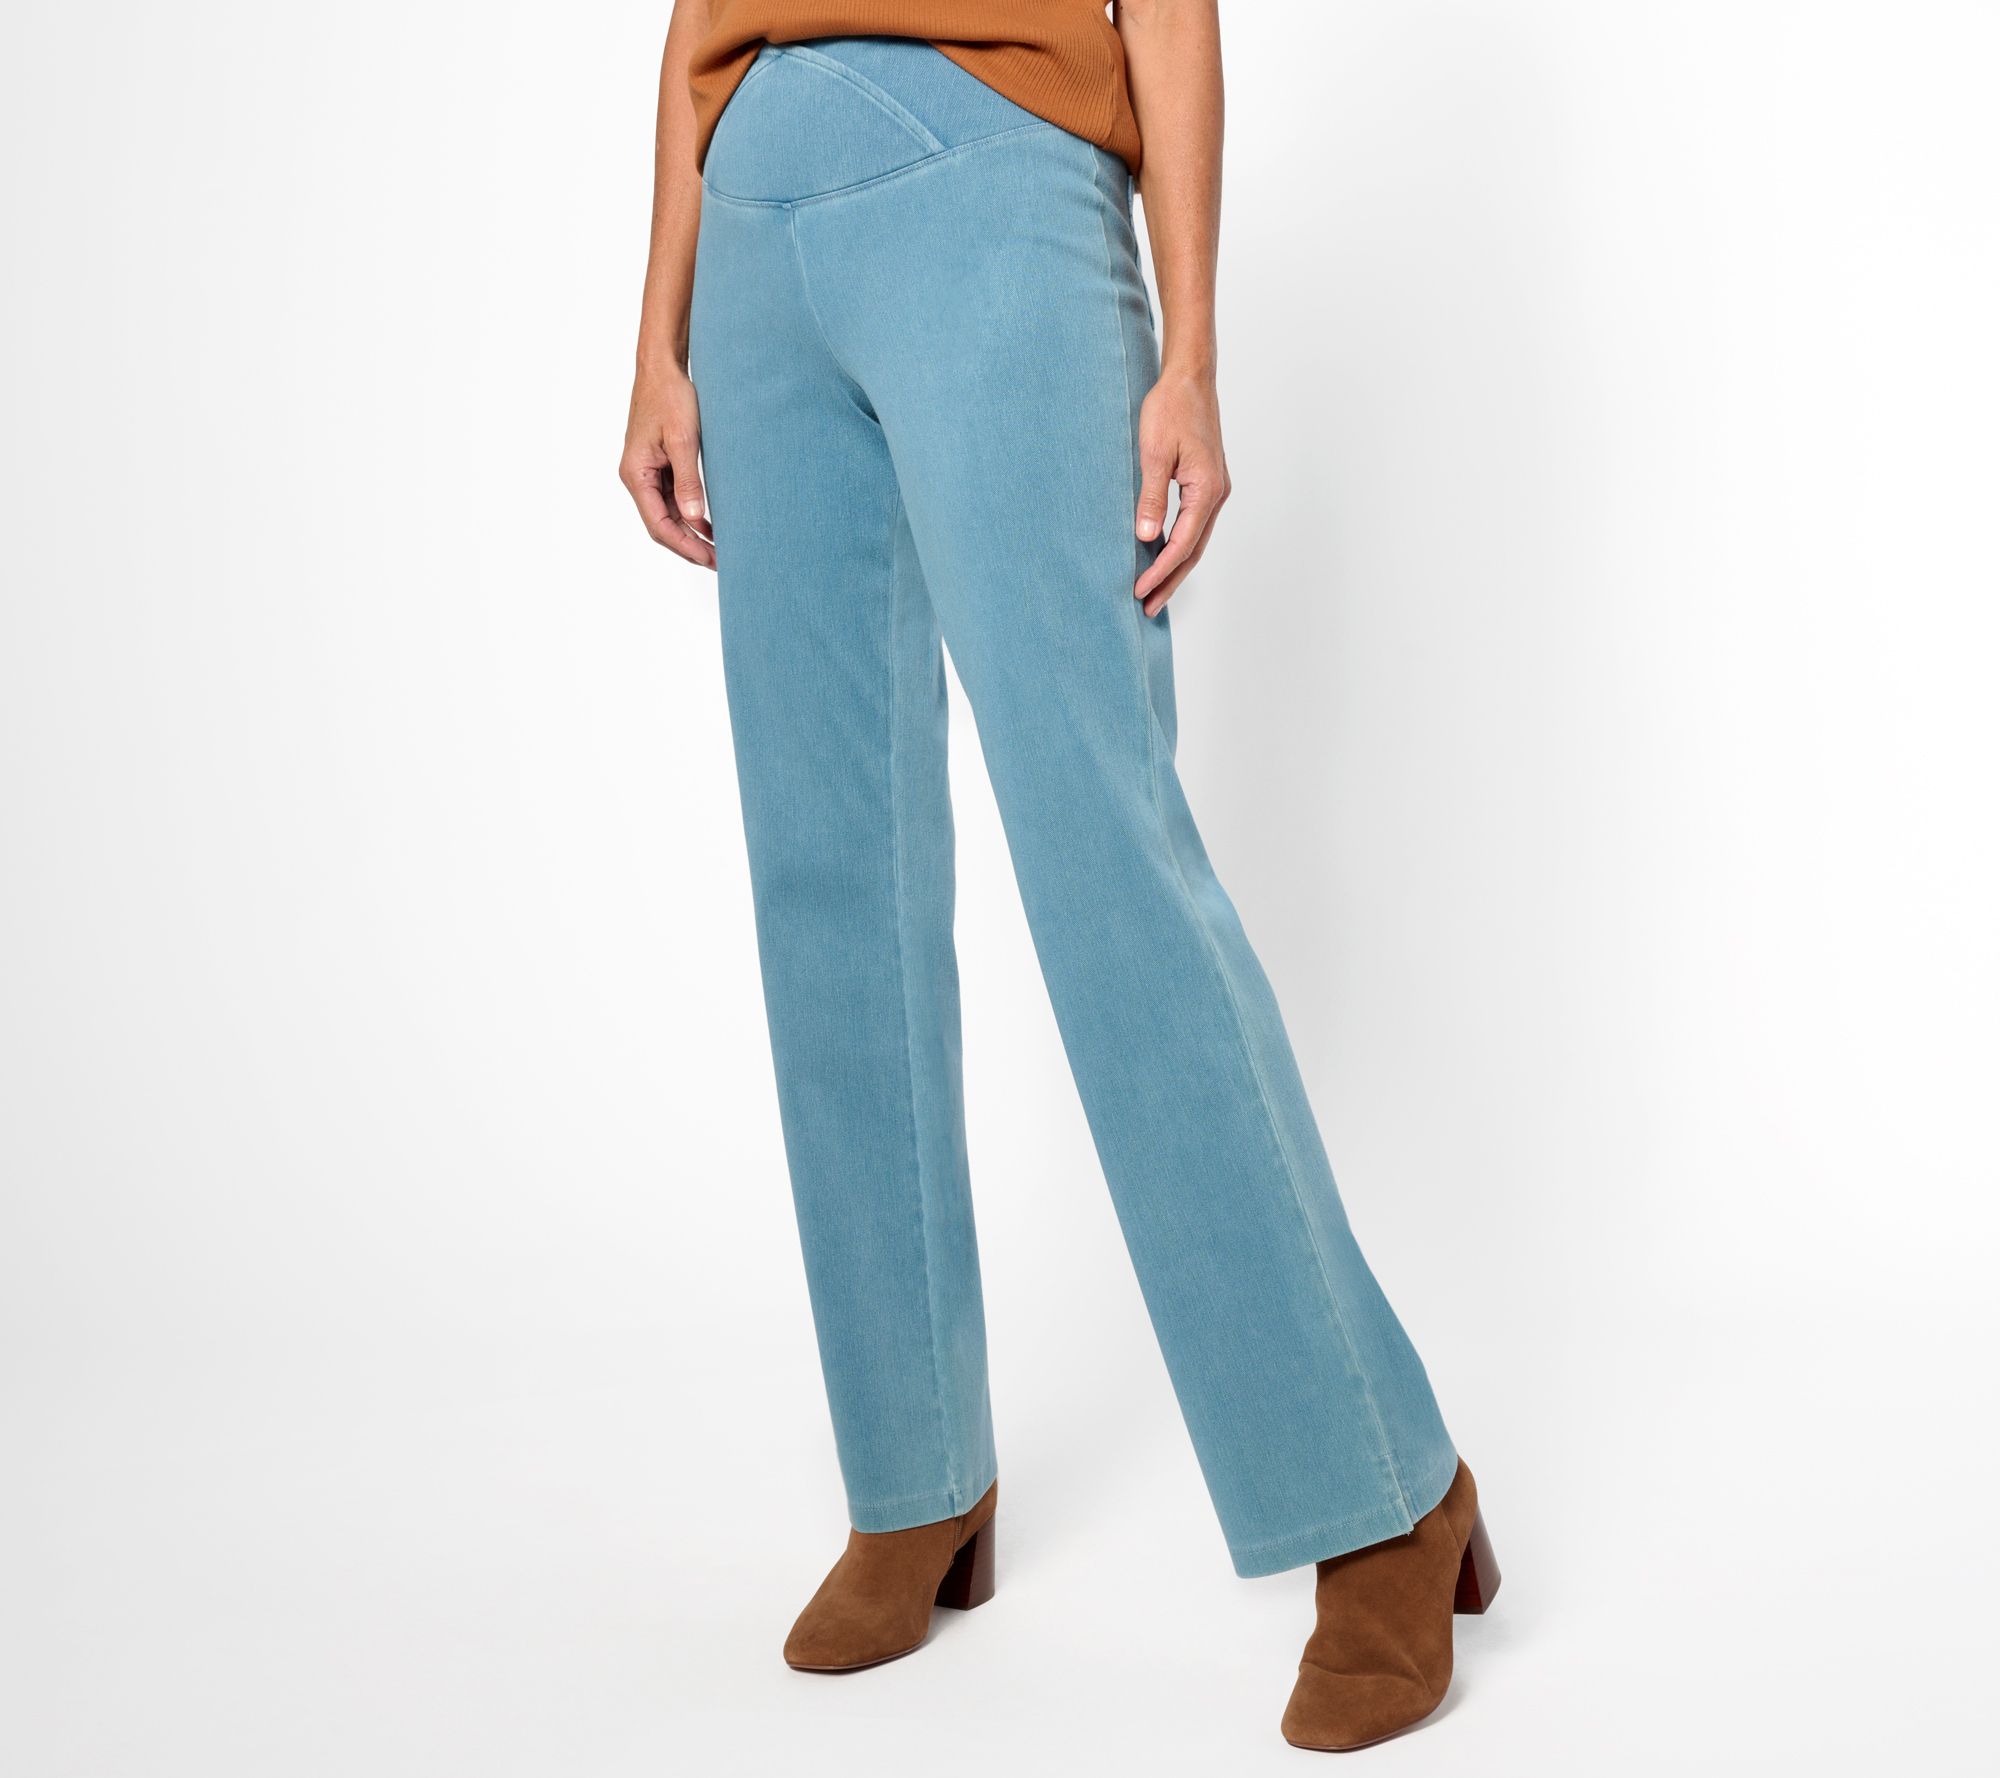 Women's Stretch Denim Flared Pants Blue, Sustainable Jeans